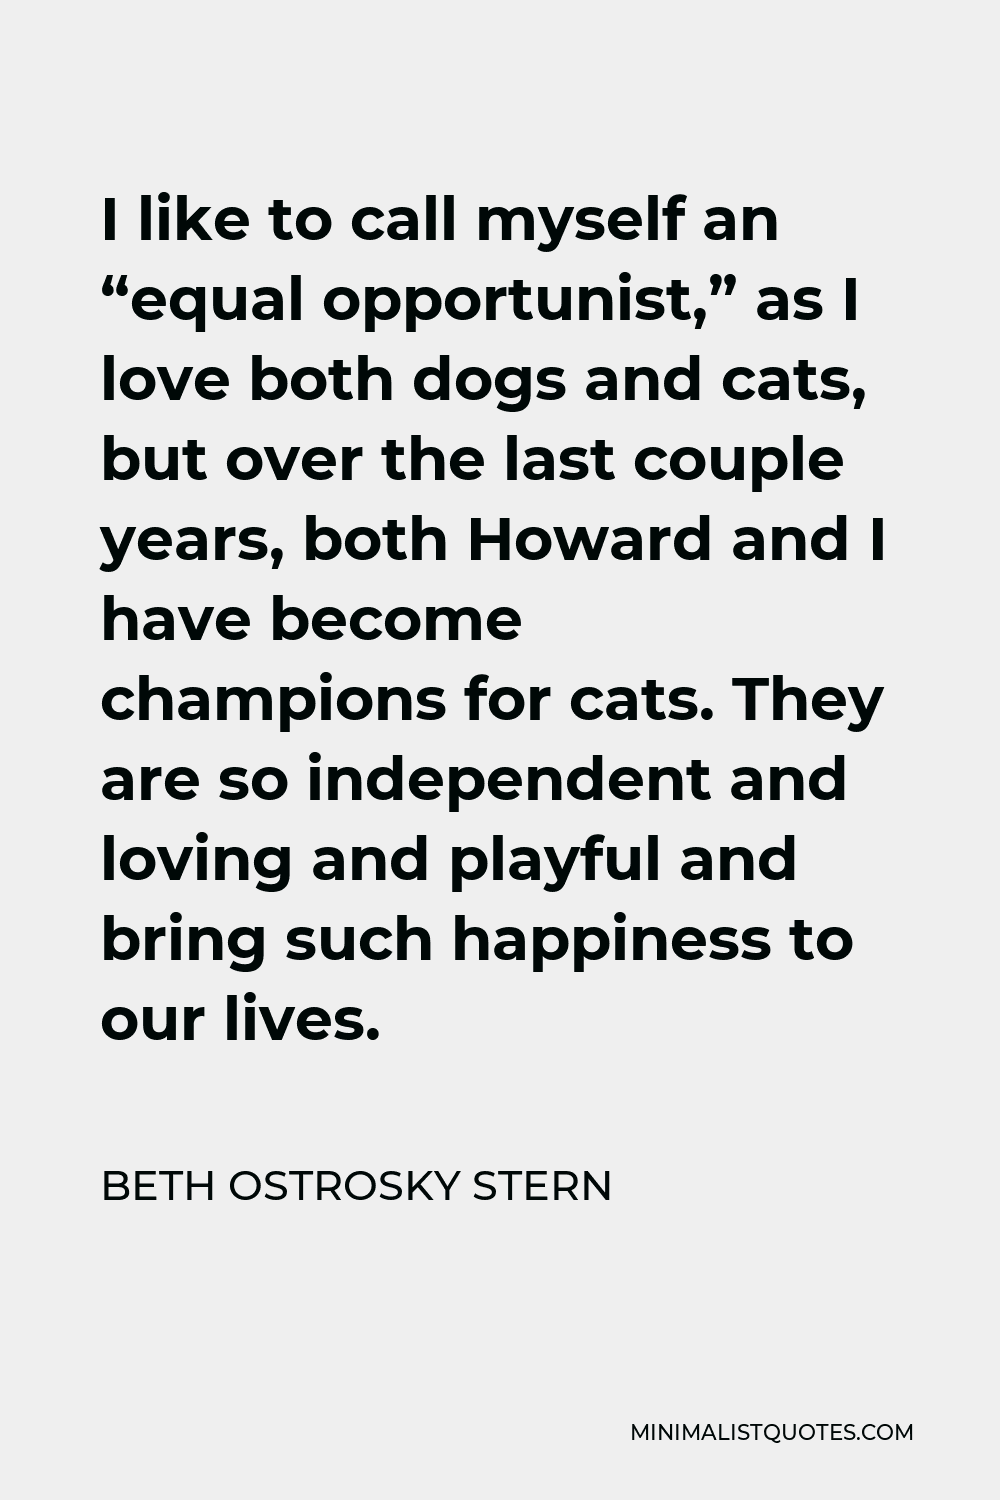 Beth Ostrosky Stern Quote - I like to call myself an “equal opportunist,” as I love both dogs and cats, but over the last couple years, both Howard and I have become champions for cats. They are so independent and loving and playful and bring such happiness to our lives.